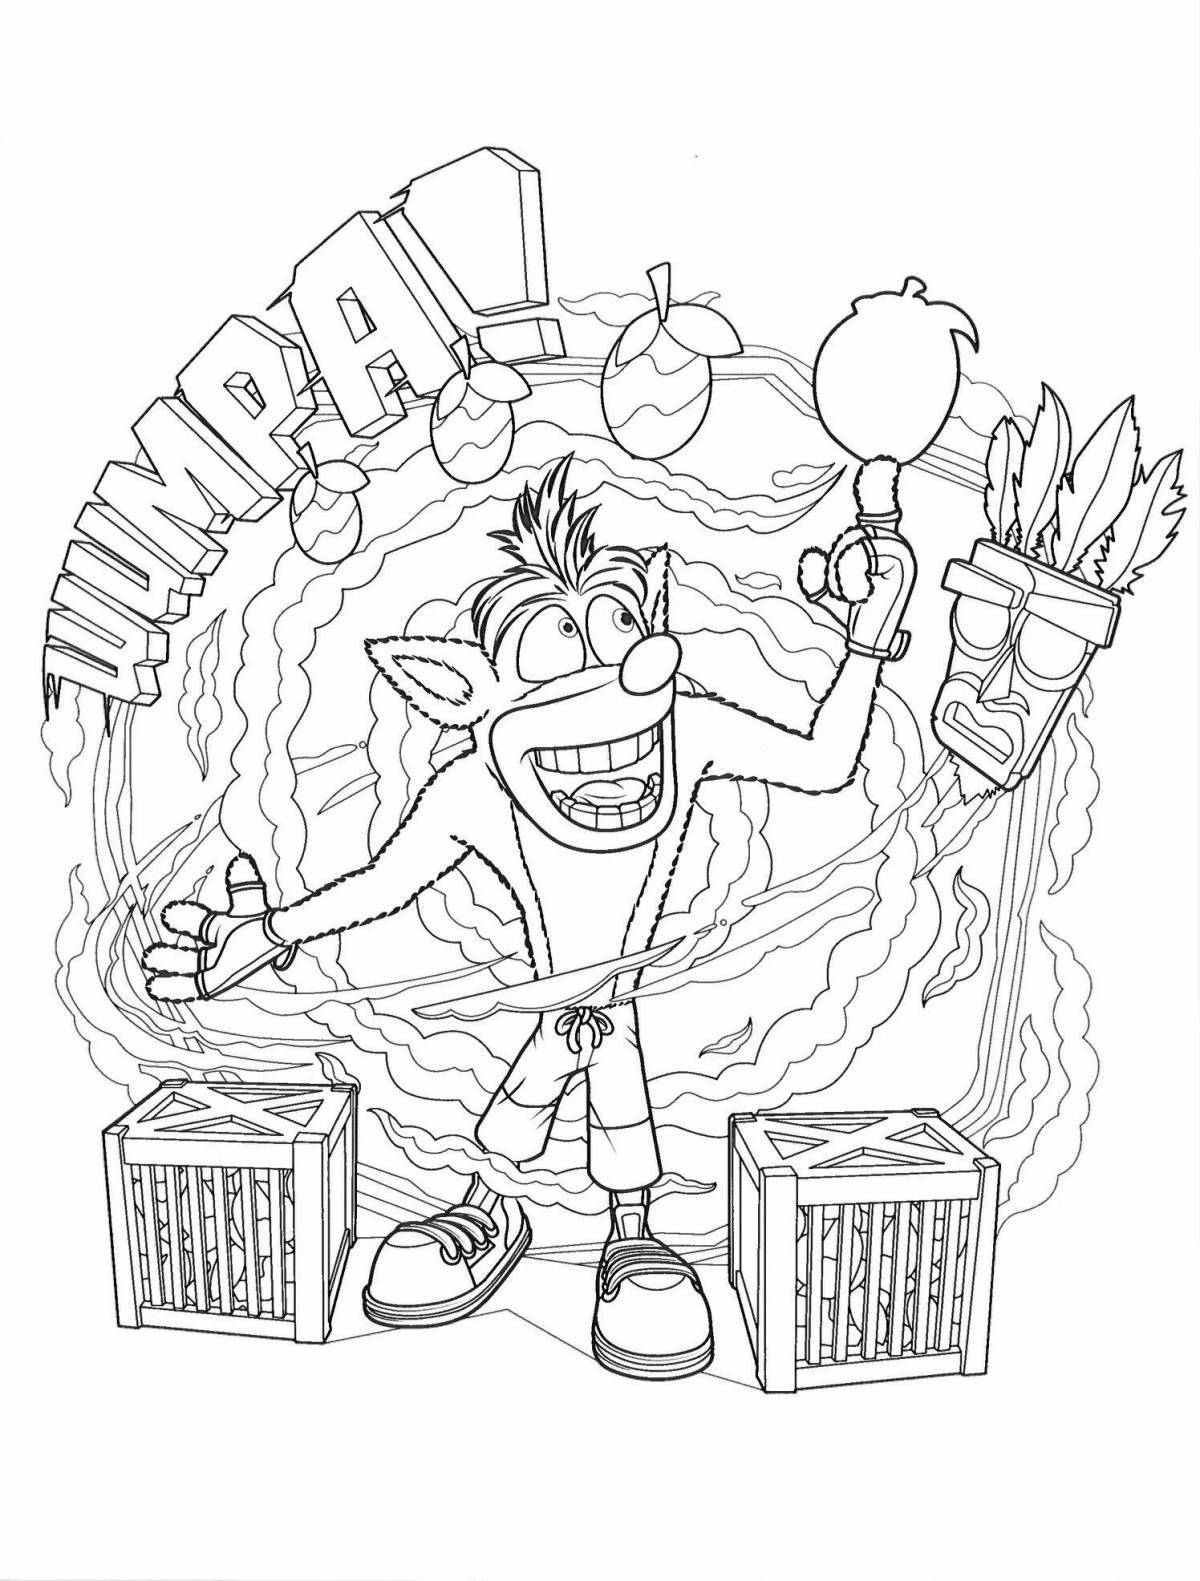 Colorful crash coloring page